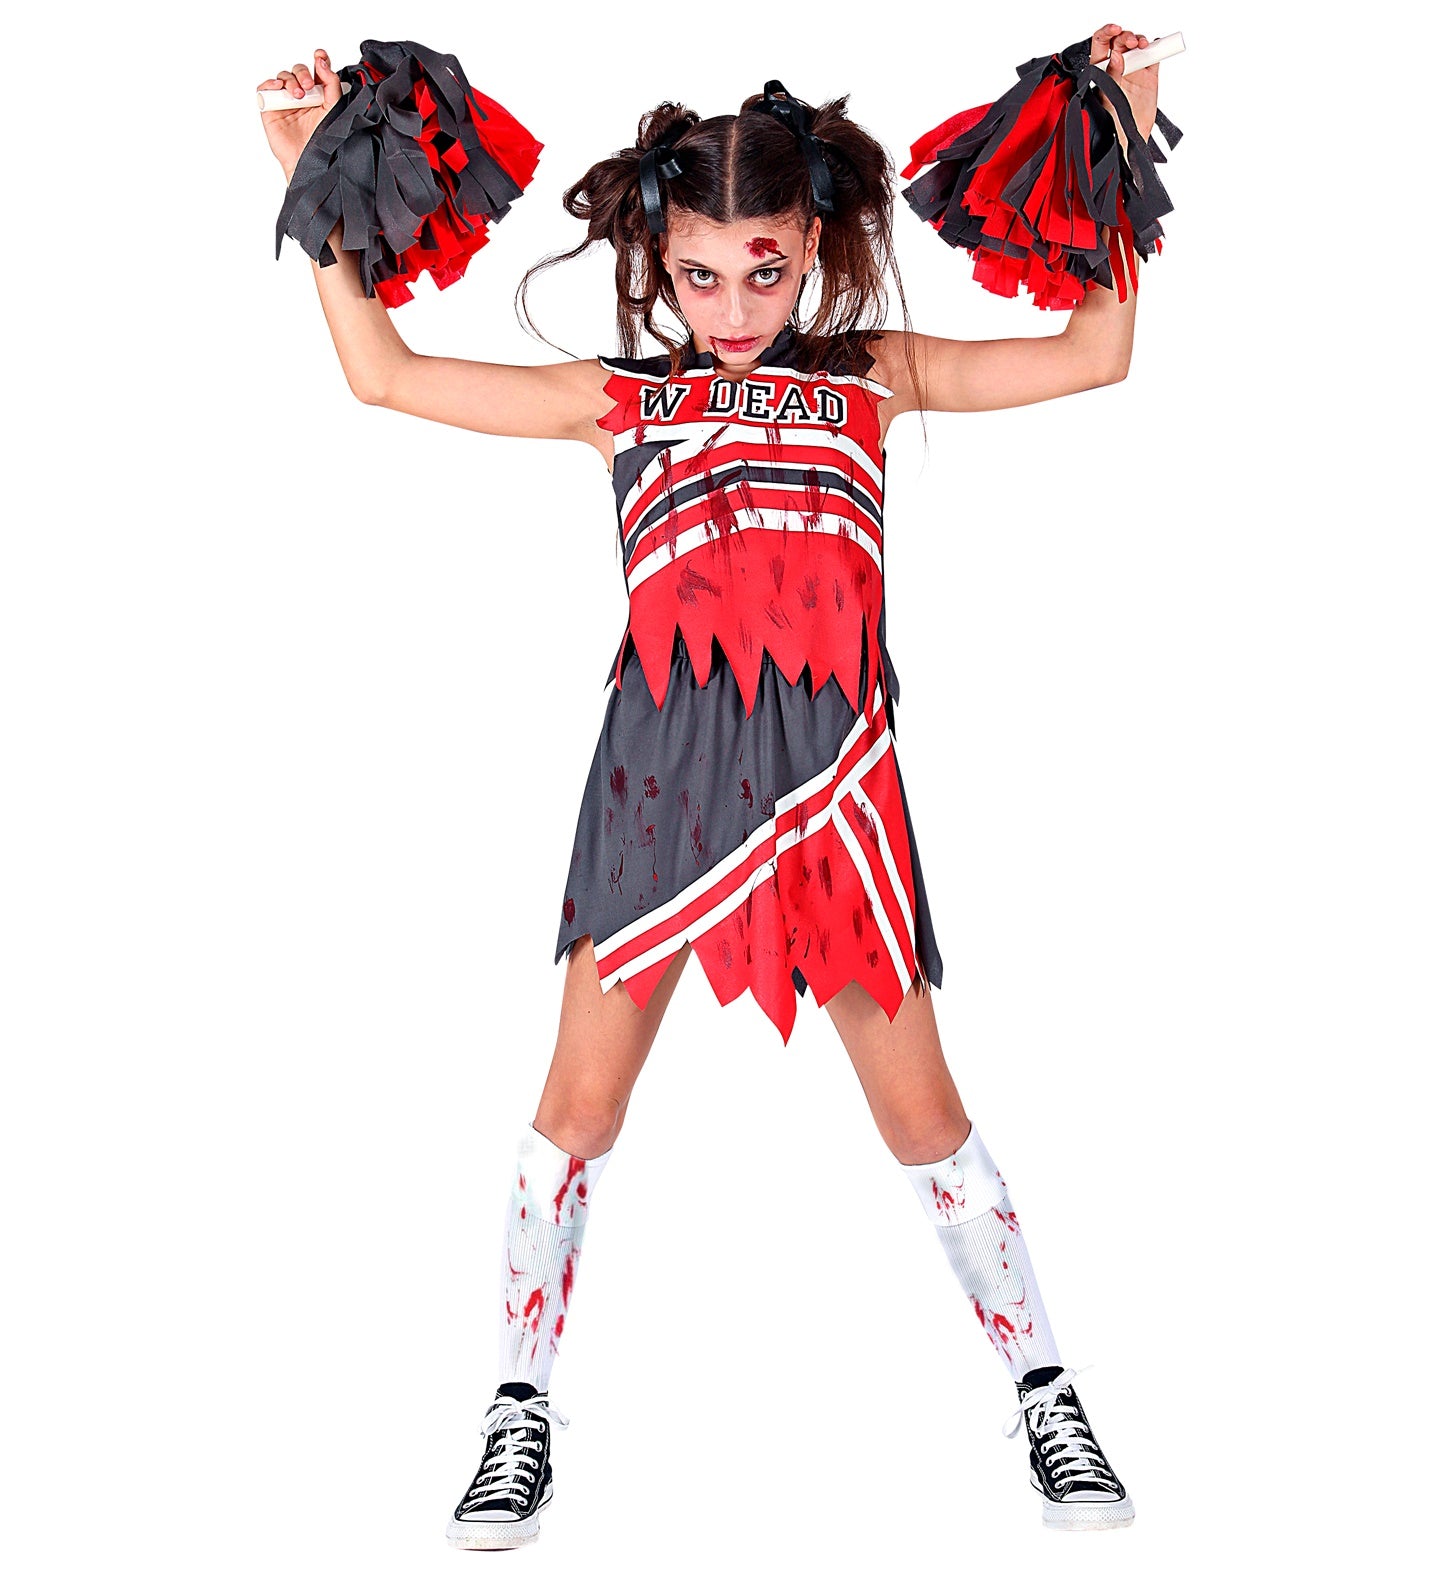 Zombie Cheerleader Girls outfit